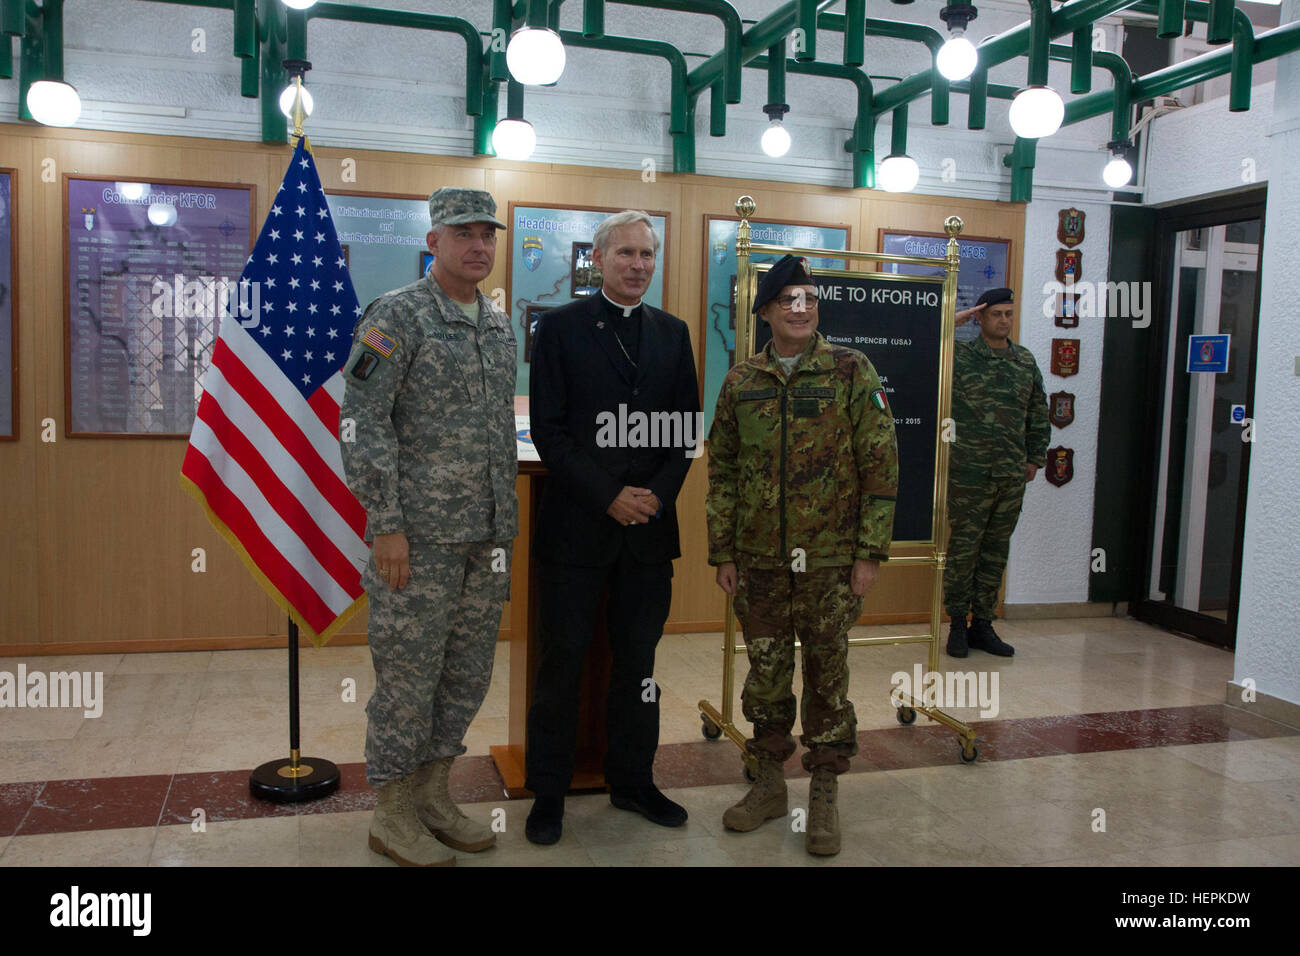 U.S. Army Brig. Gen. Janson D. Boyles (left), the Kosovo Force Chief of Staff, Bishop Richard Spencer (center), from the Archdiocese for the Military Services, USA, and Italian Maj. Gen. Guglielmo Luigi Miglietta (right), the KFOR Commander, pose for a group photo during Spencer’s Oct. 7, 2015, religious support visit to the KFOR headquarters at Camp Film City in Pristina, Kosovo. Spencer met with the leaders to discuss religious support topics important to the command. Spencer, a retired Army colonel and chaplain, is the Episcopal Vicar for Europe and Asia, responsible for providing religious Stock Photo